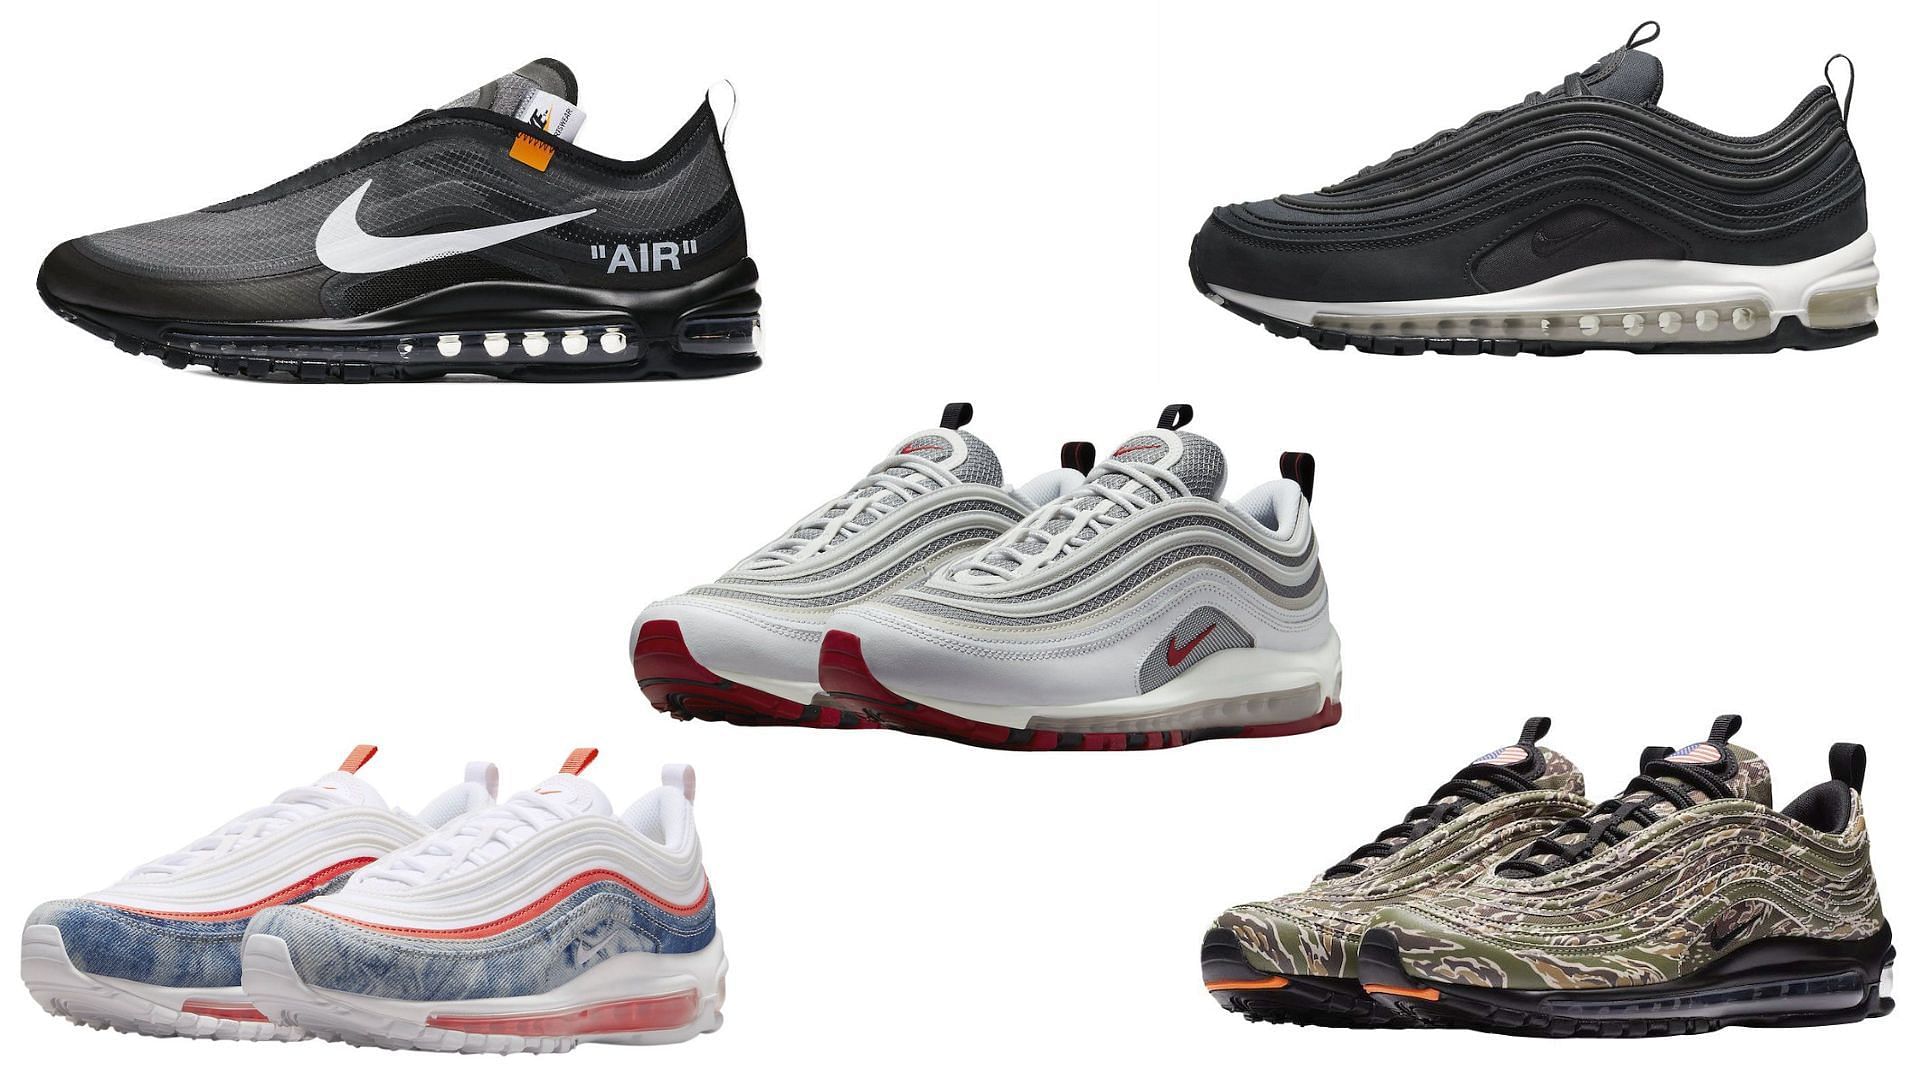 Right Crow Algebraic 5 best Air Max 97 colorways and their prices